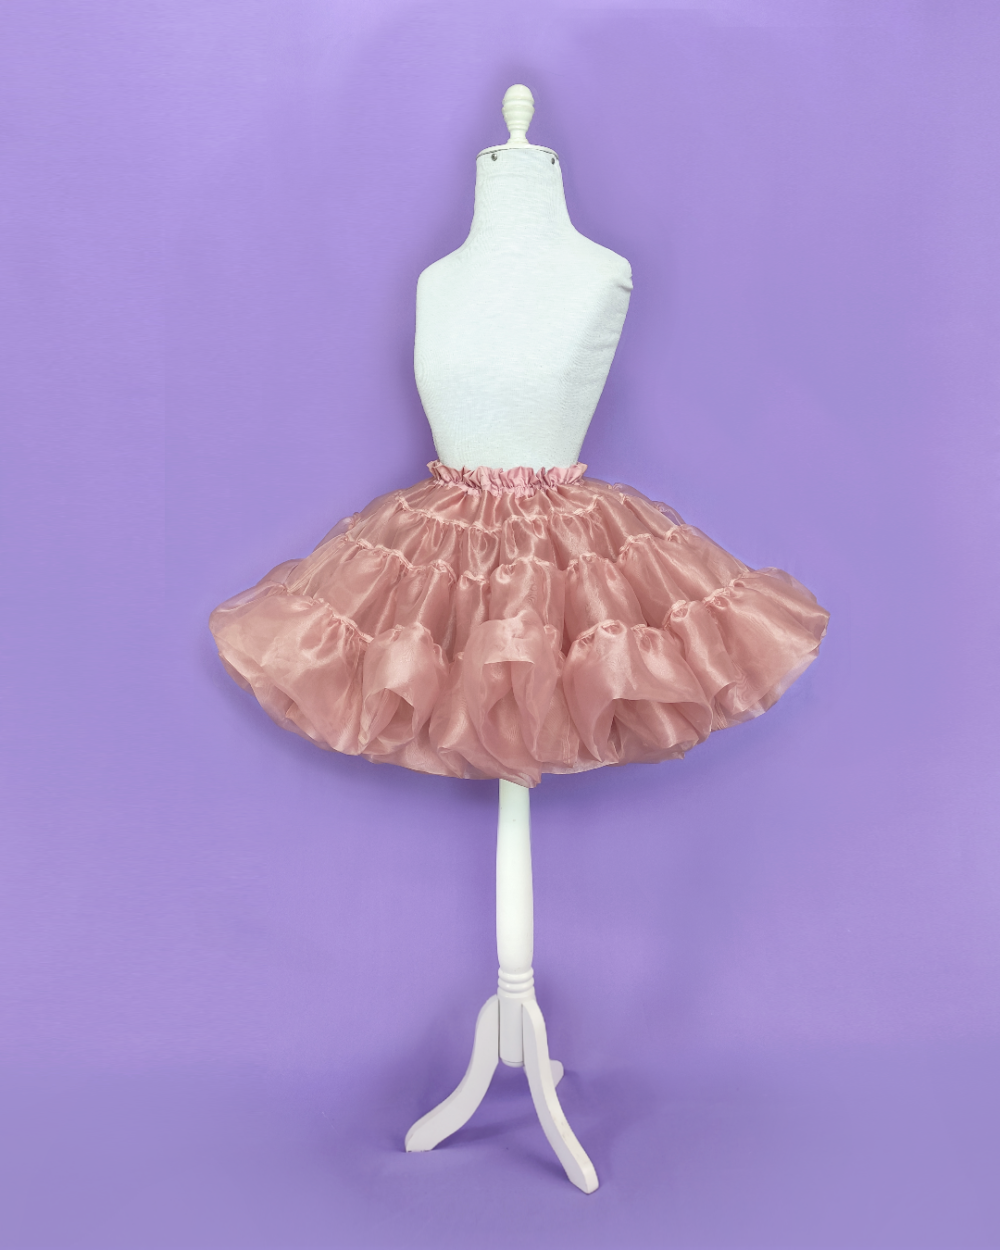 Petticoat made in cameo brown organza and lined.